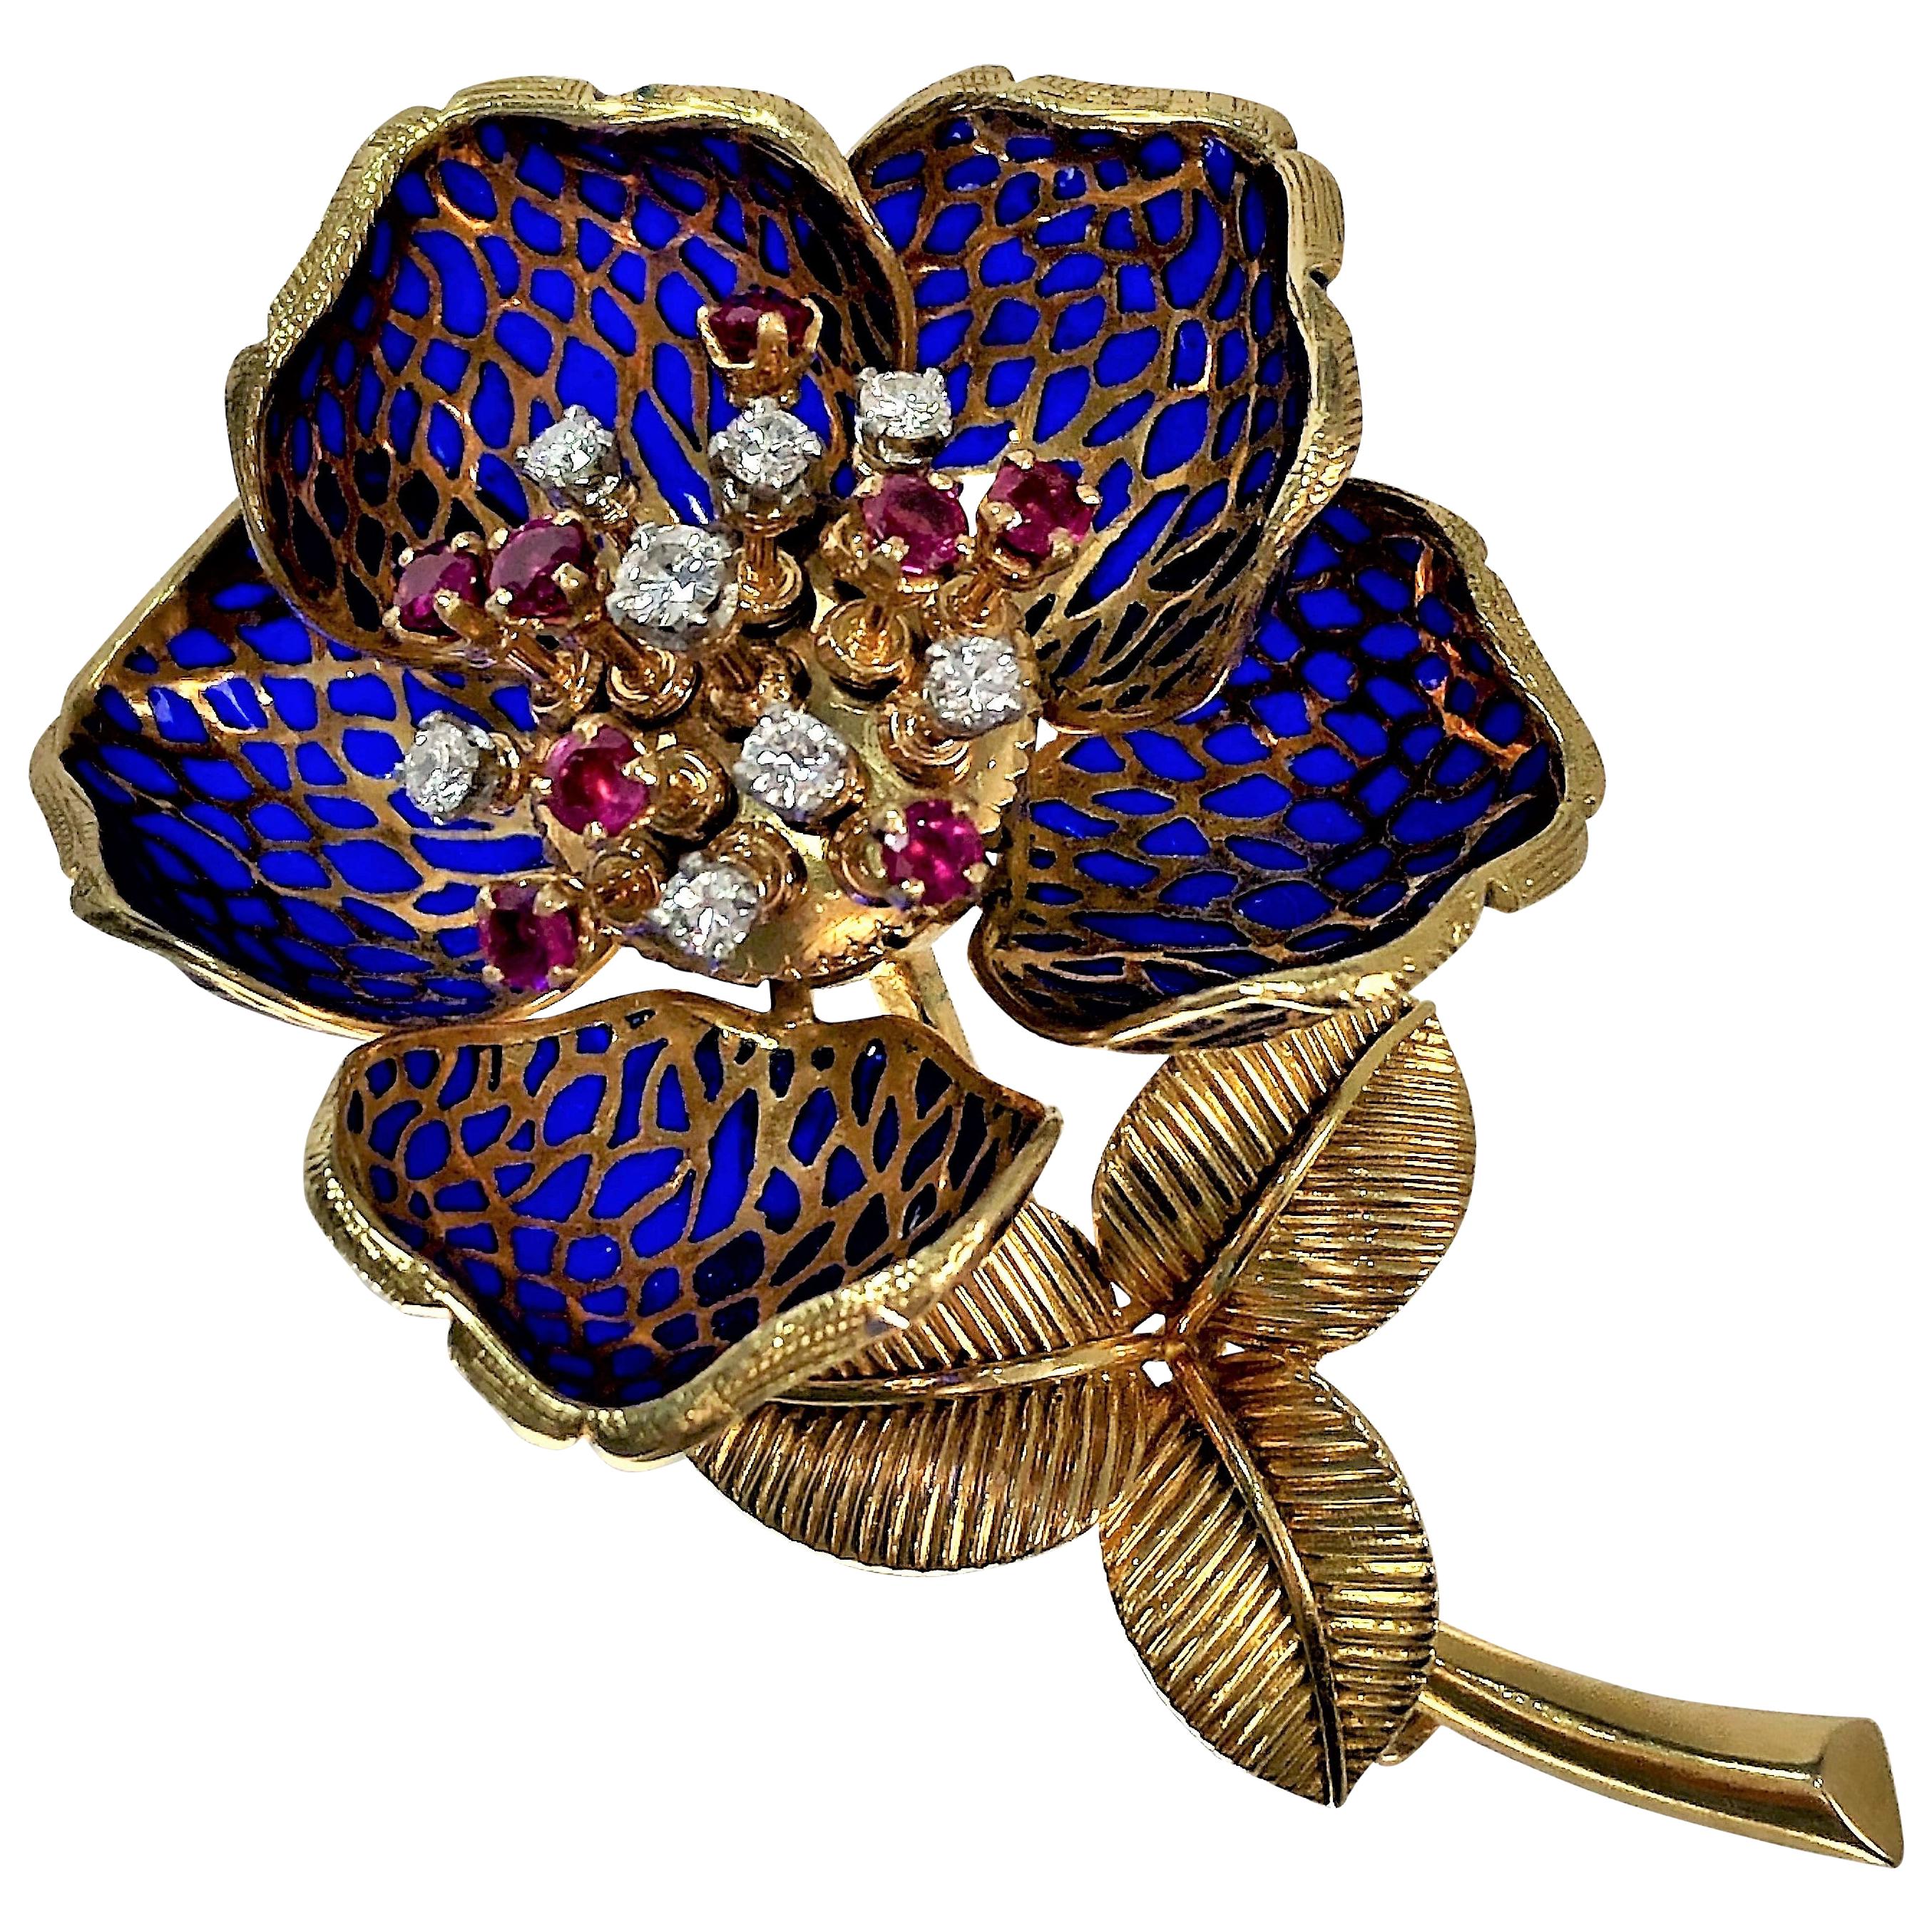 French Plique a Jour en Tremblant Flower Brooch with Diamond and Ruby Center